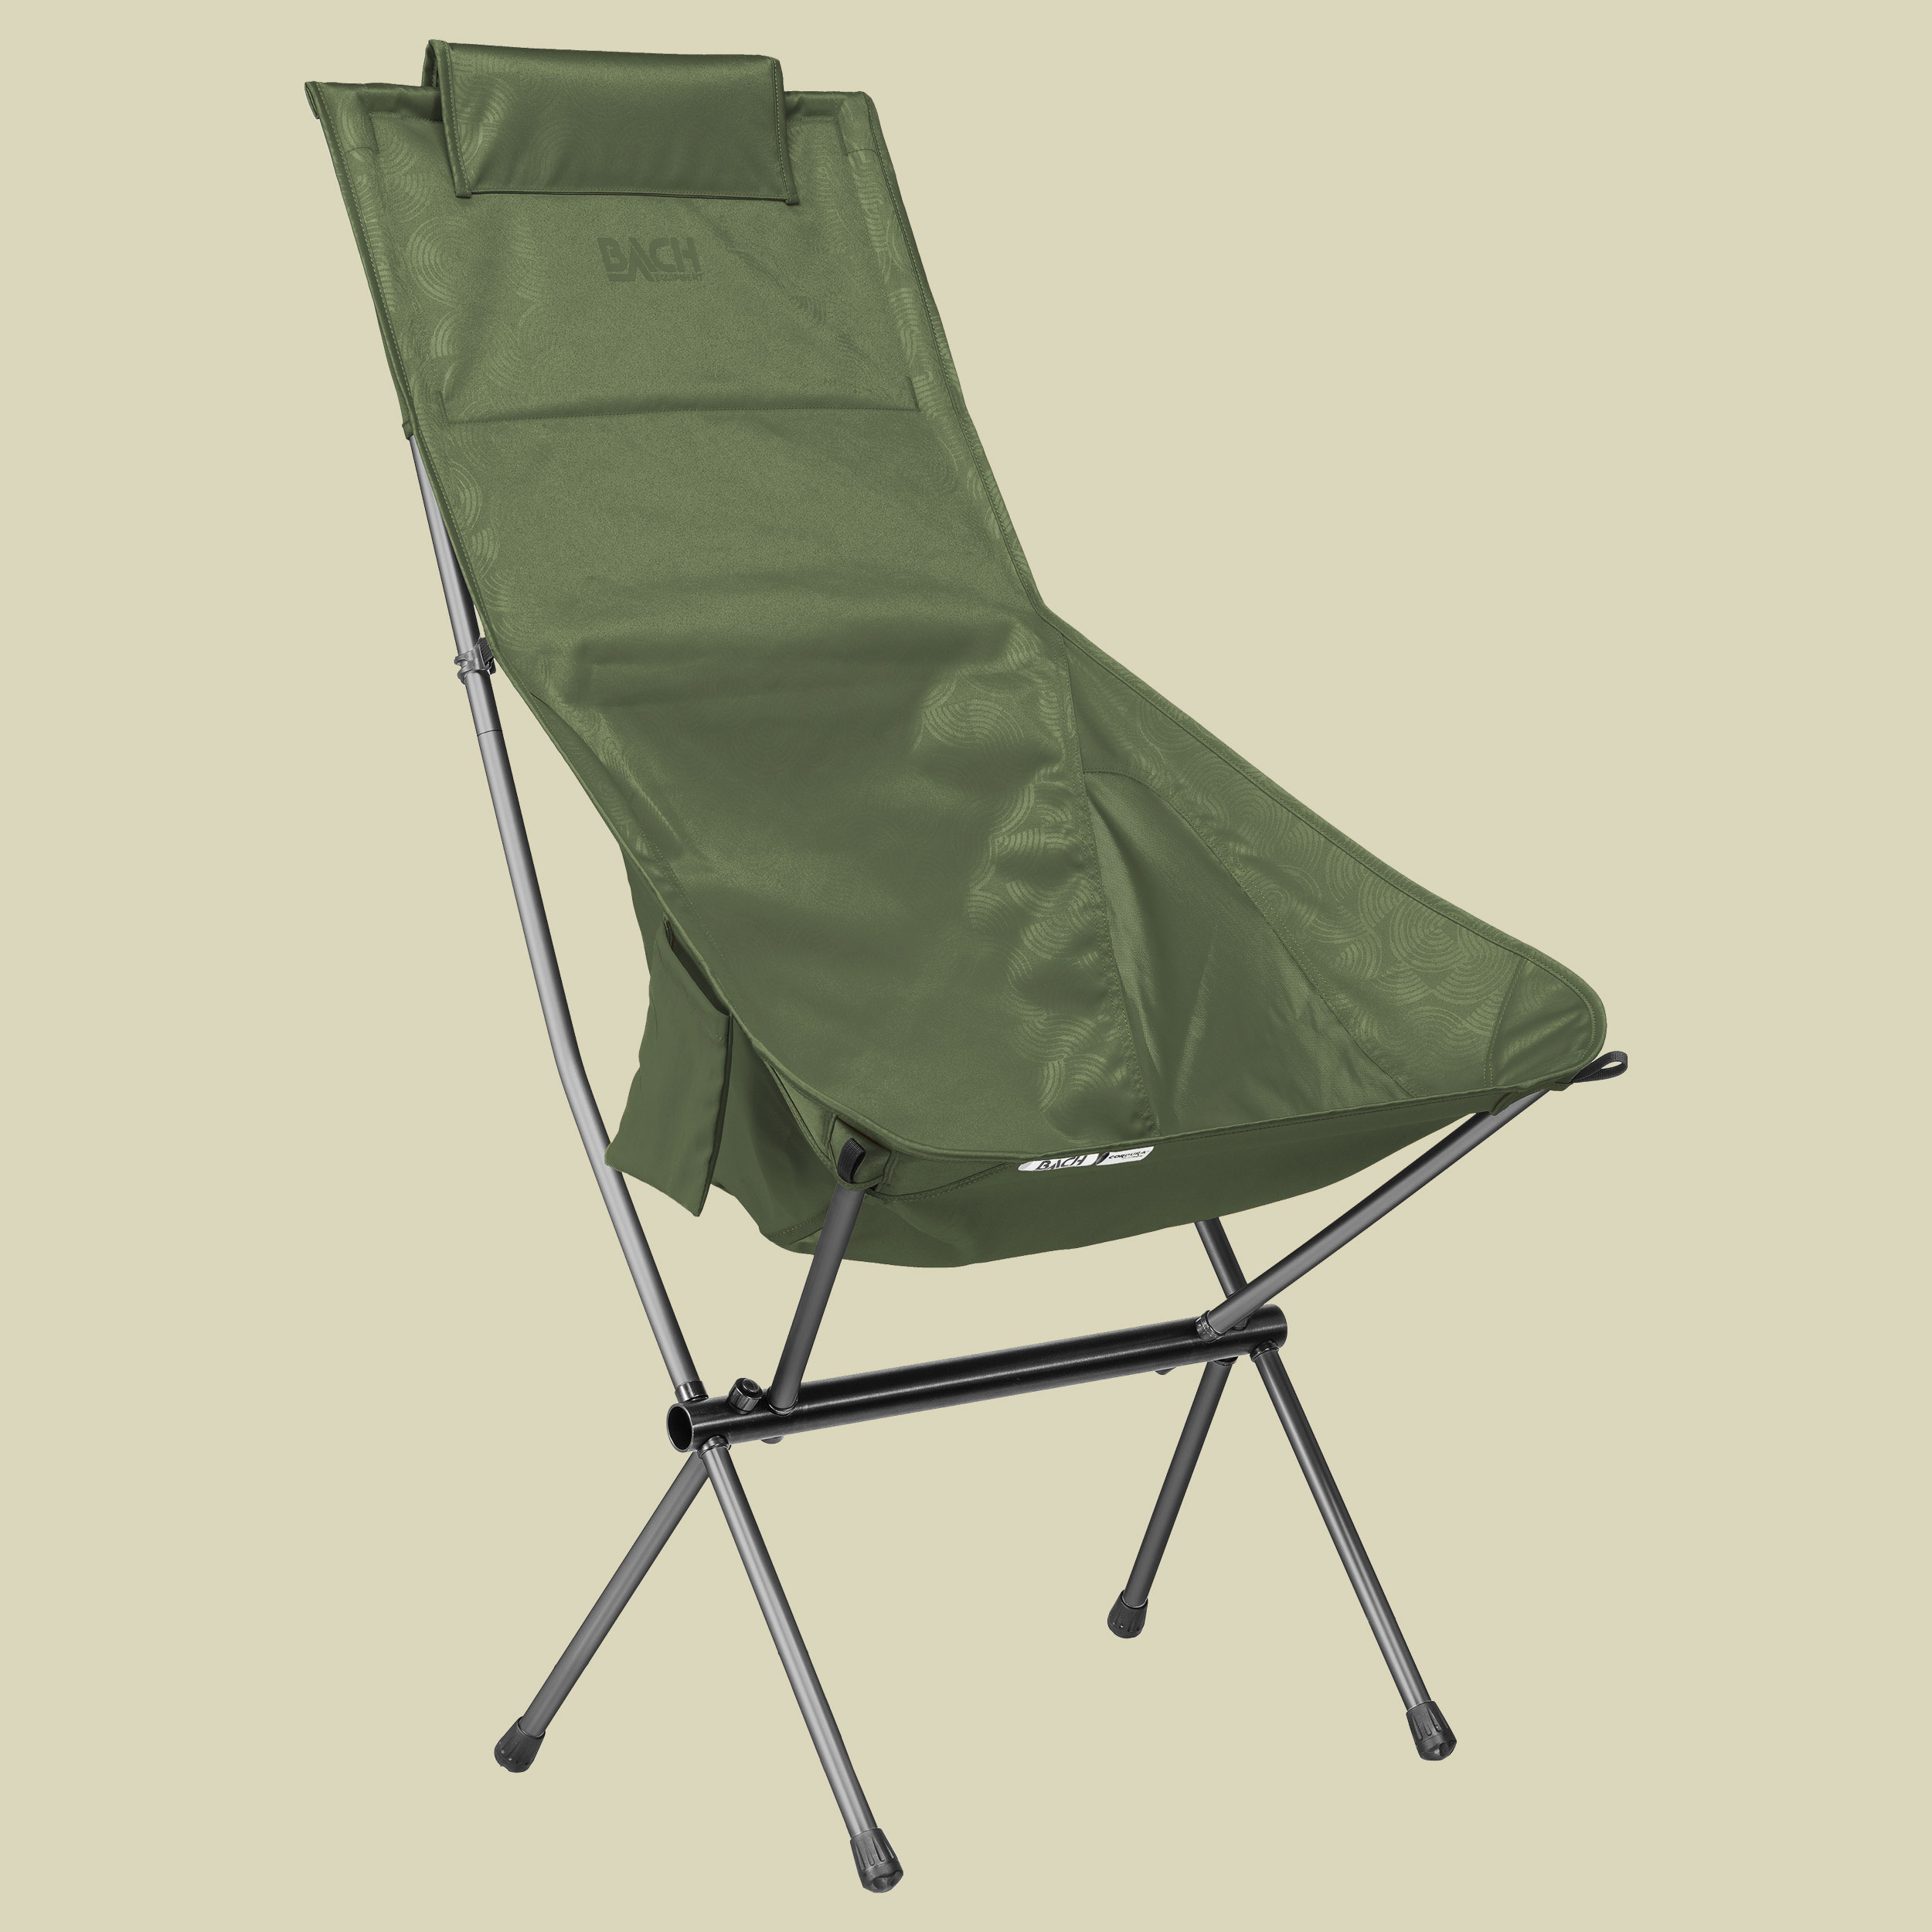 Chair Kingfisher Größe one size Farbe chive green